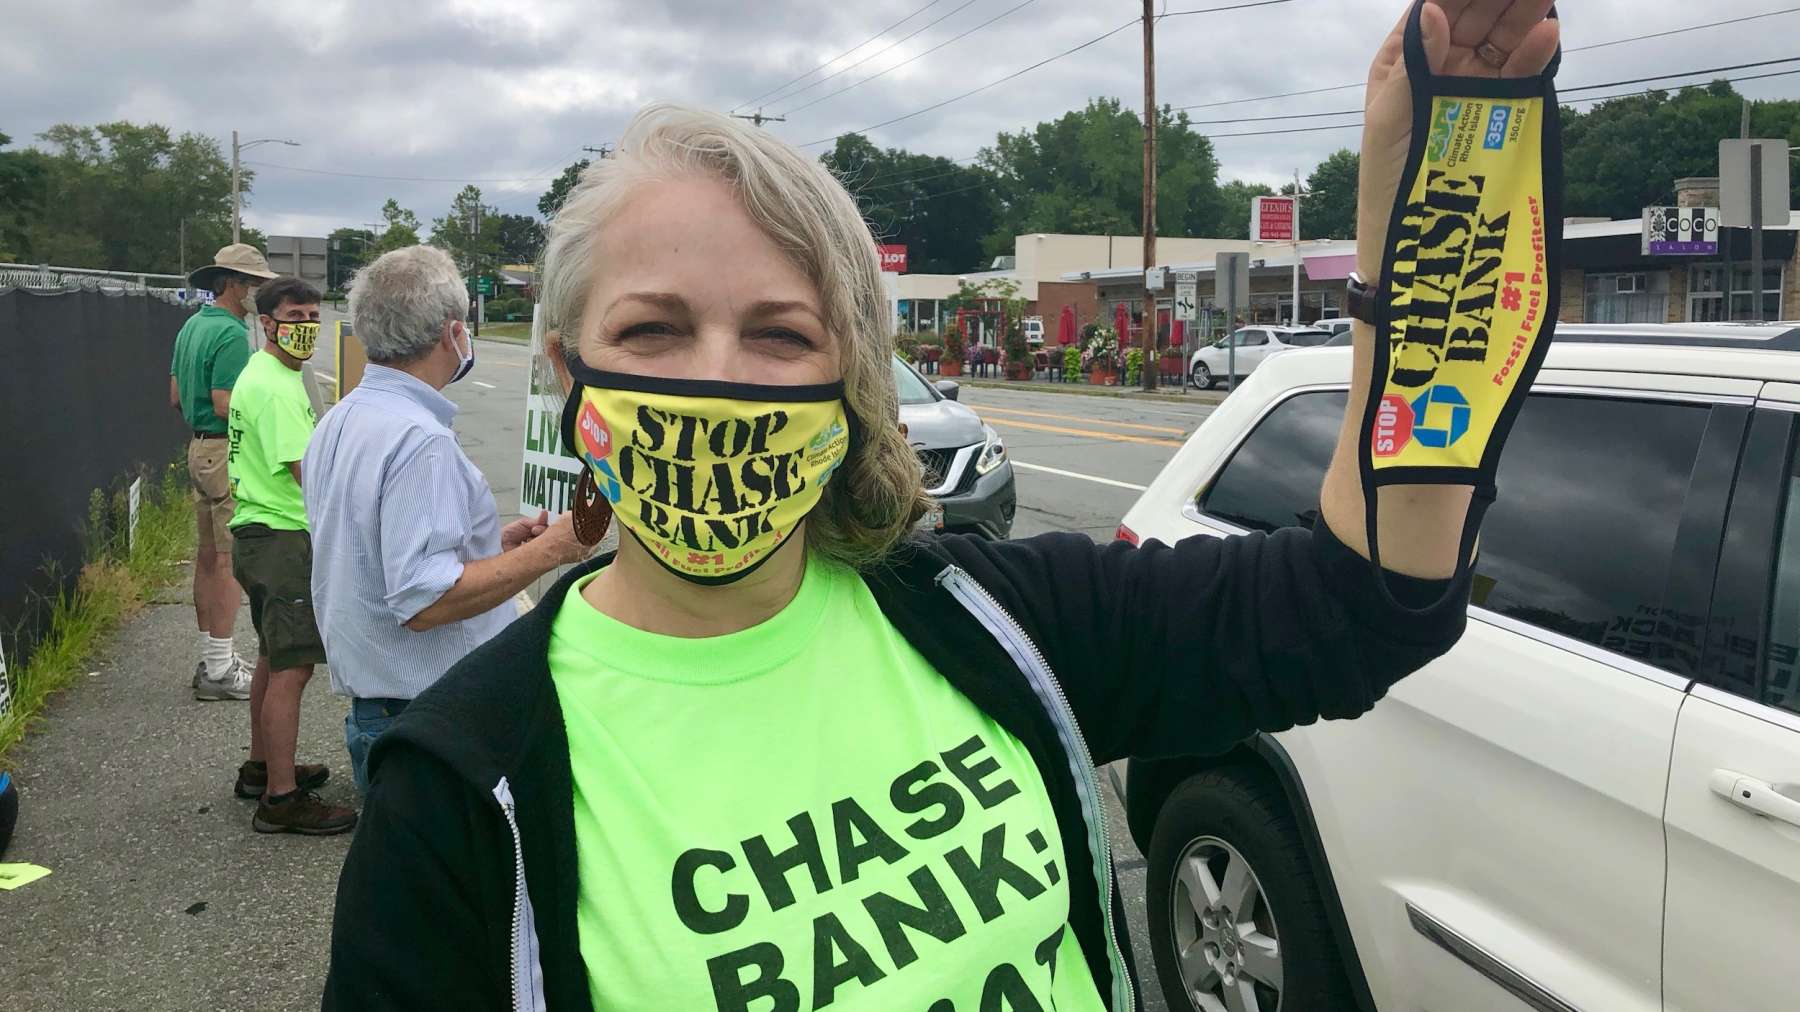 Chase Bank continues to expand in RI, continues to fund climate change